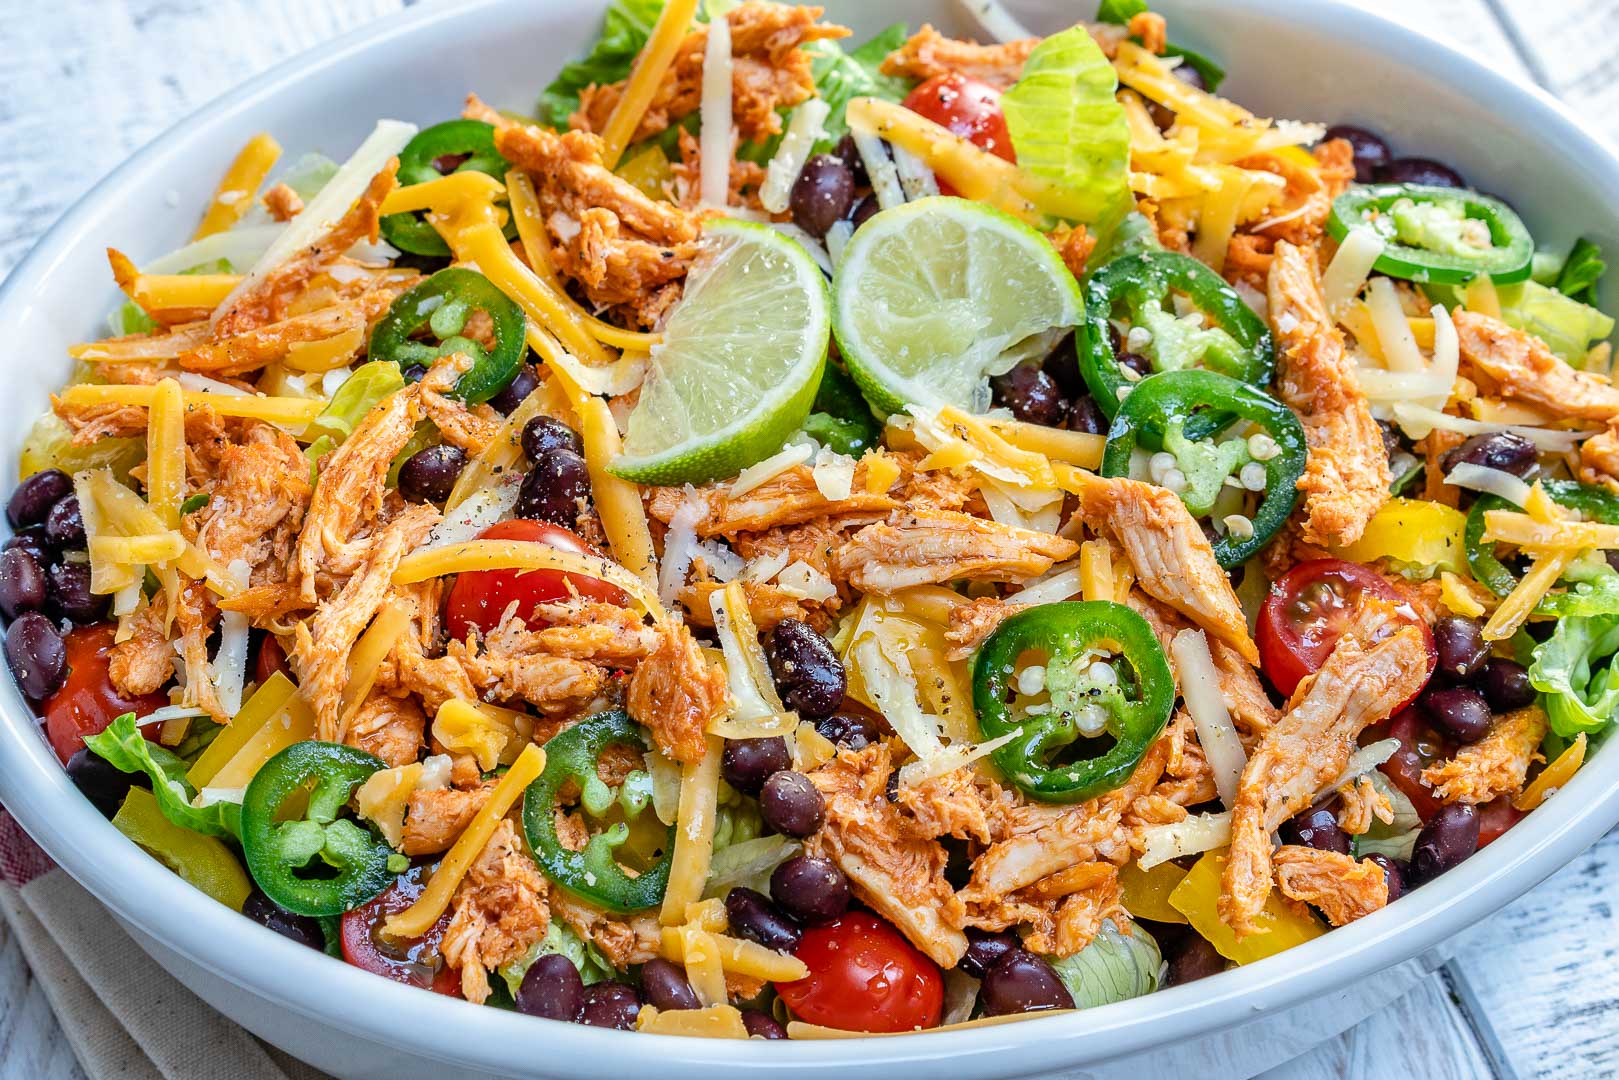 This Clean Chicken Salad Exploding with Flavor! | Clean Food Crush